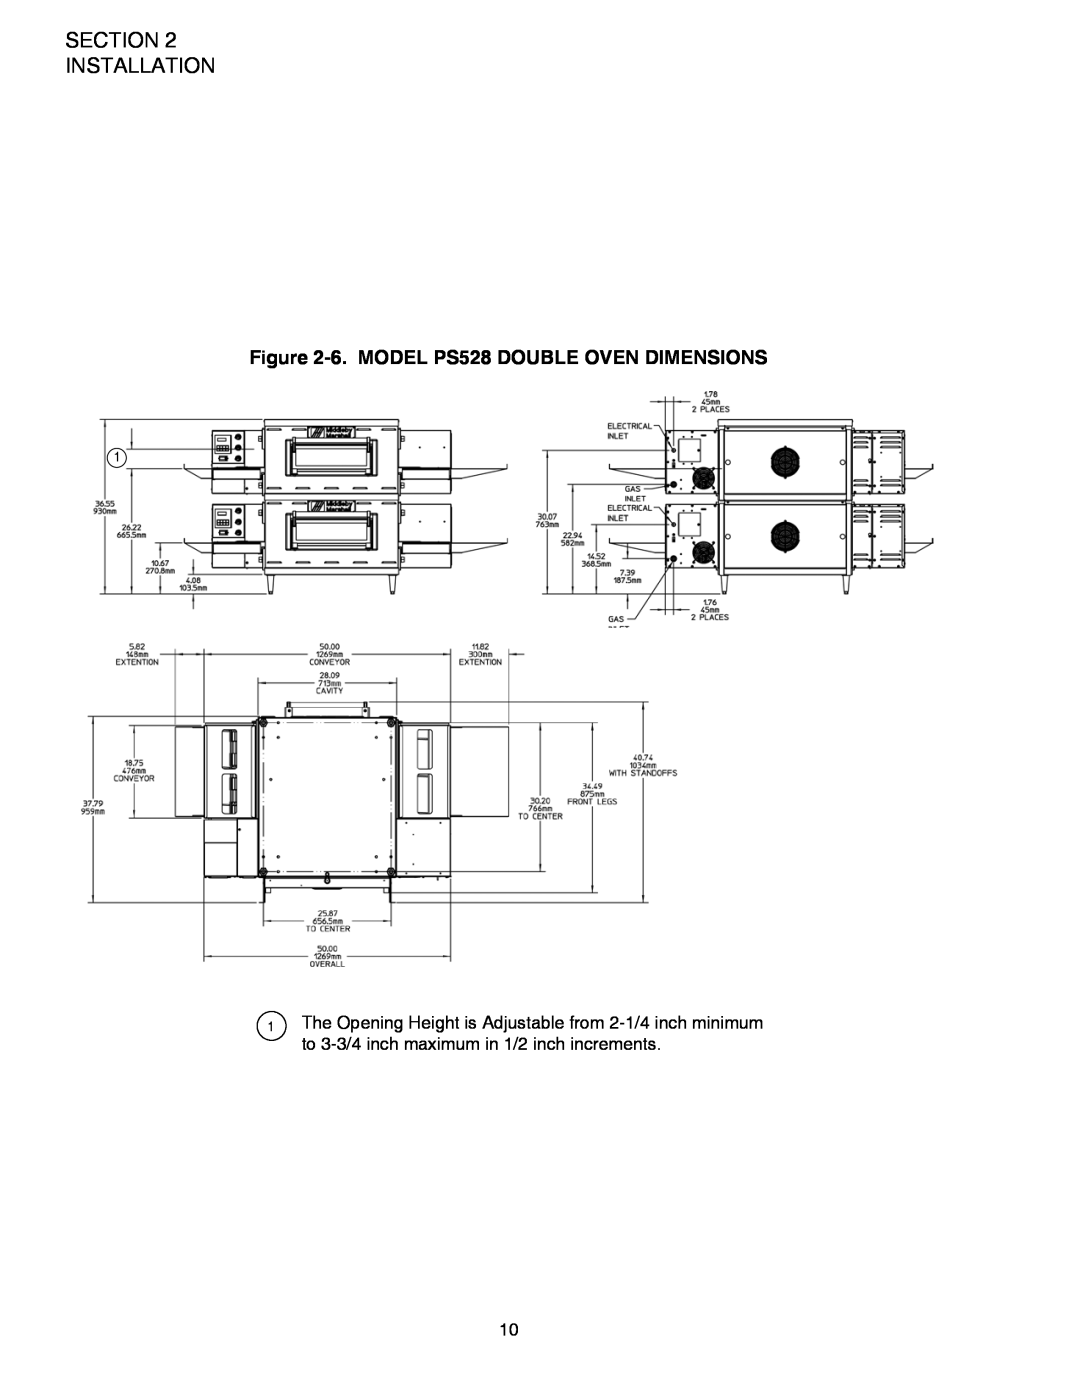 Middleby Marshall PS528 (Triple), PS528E, PS528 (Double) Section Installation, 6. MODEL PS528 DOUBLE OVEN DIMENSIONS 